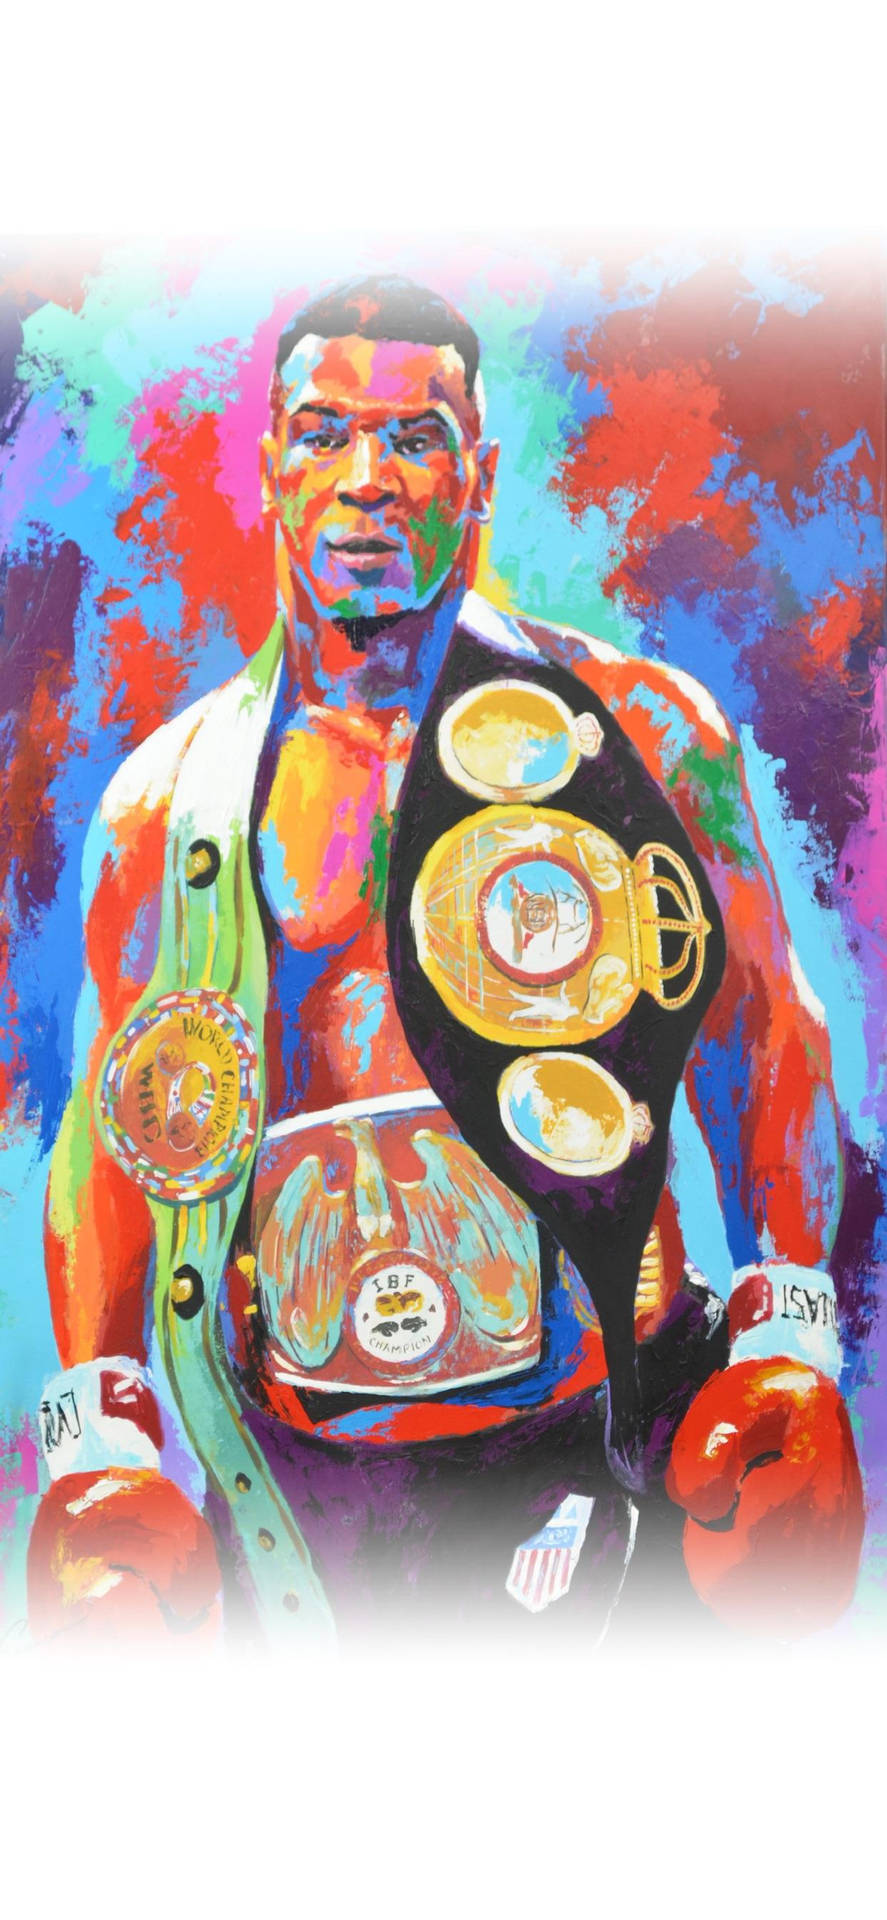 Mike Tyson 4k Colorful Painting Wallpaper